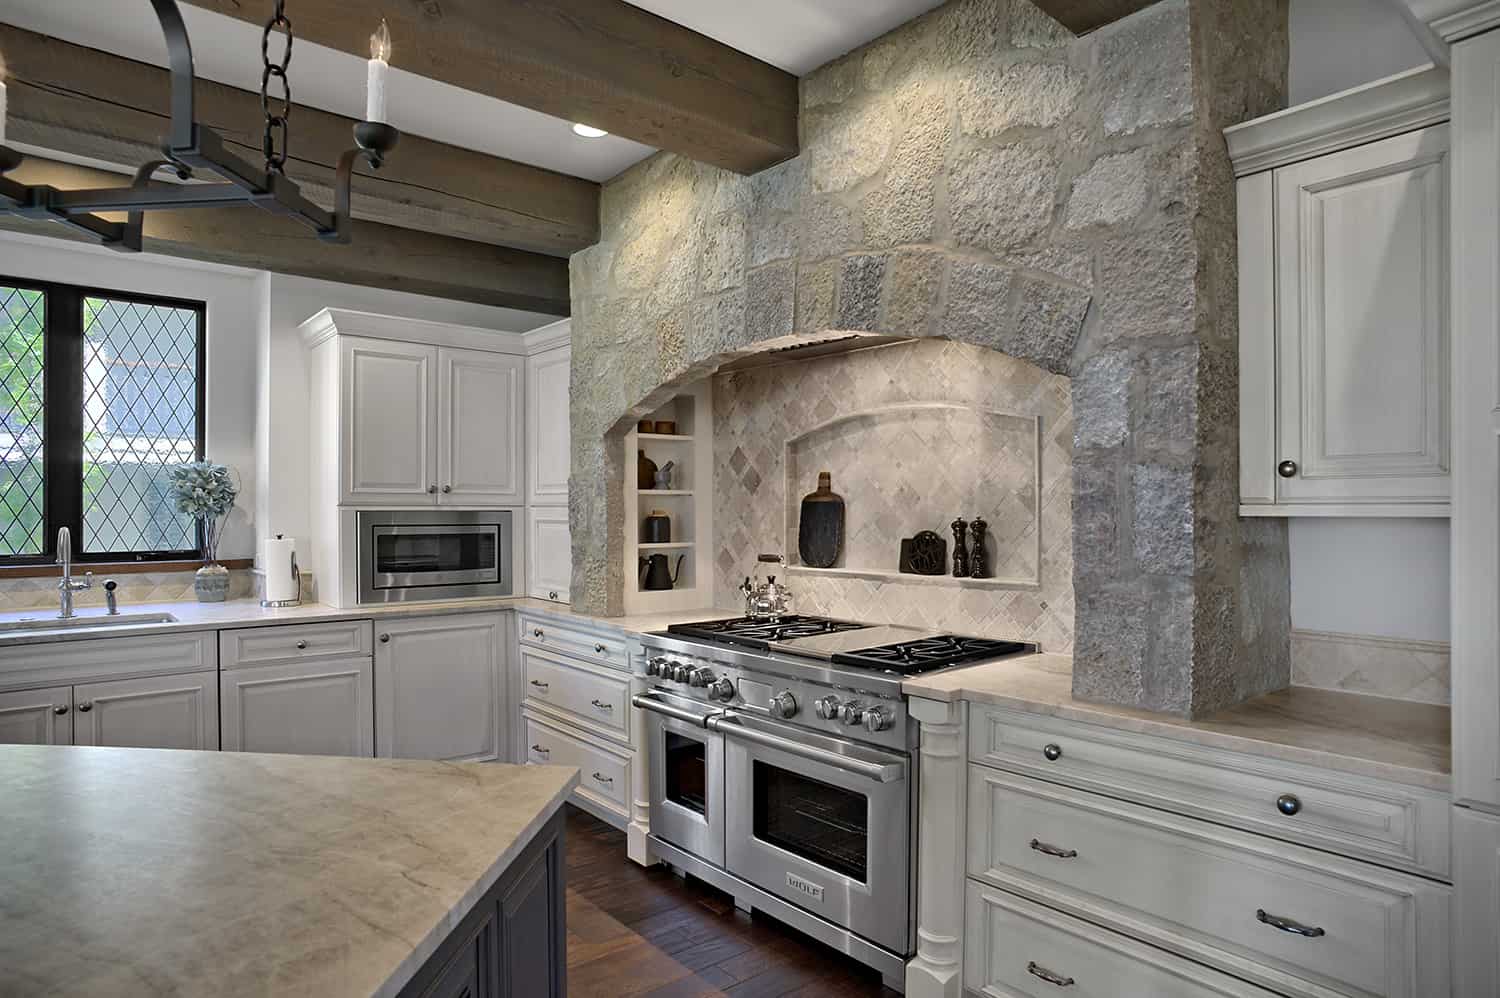 ached stone range surround with multiple niches